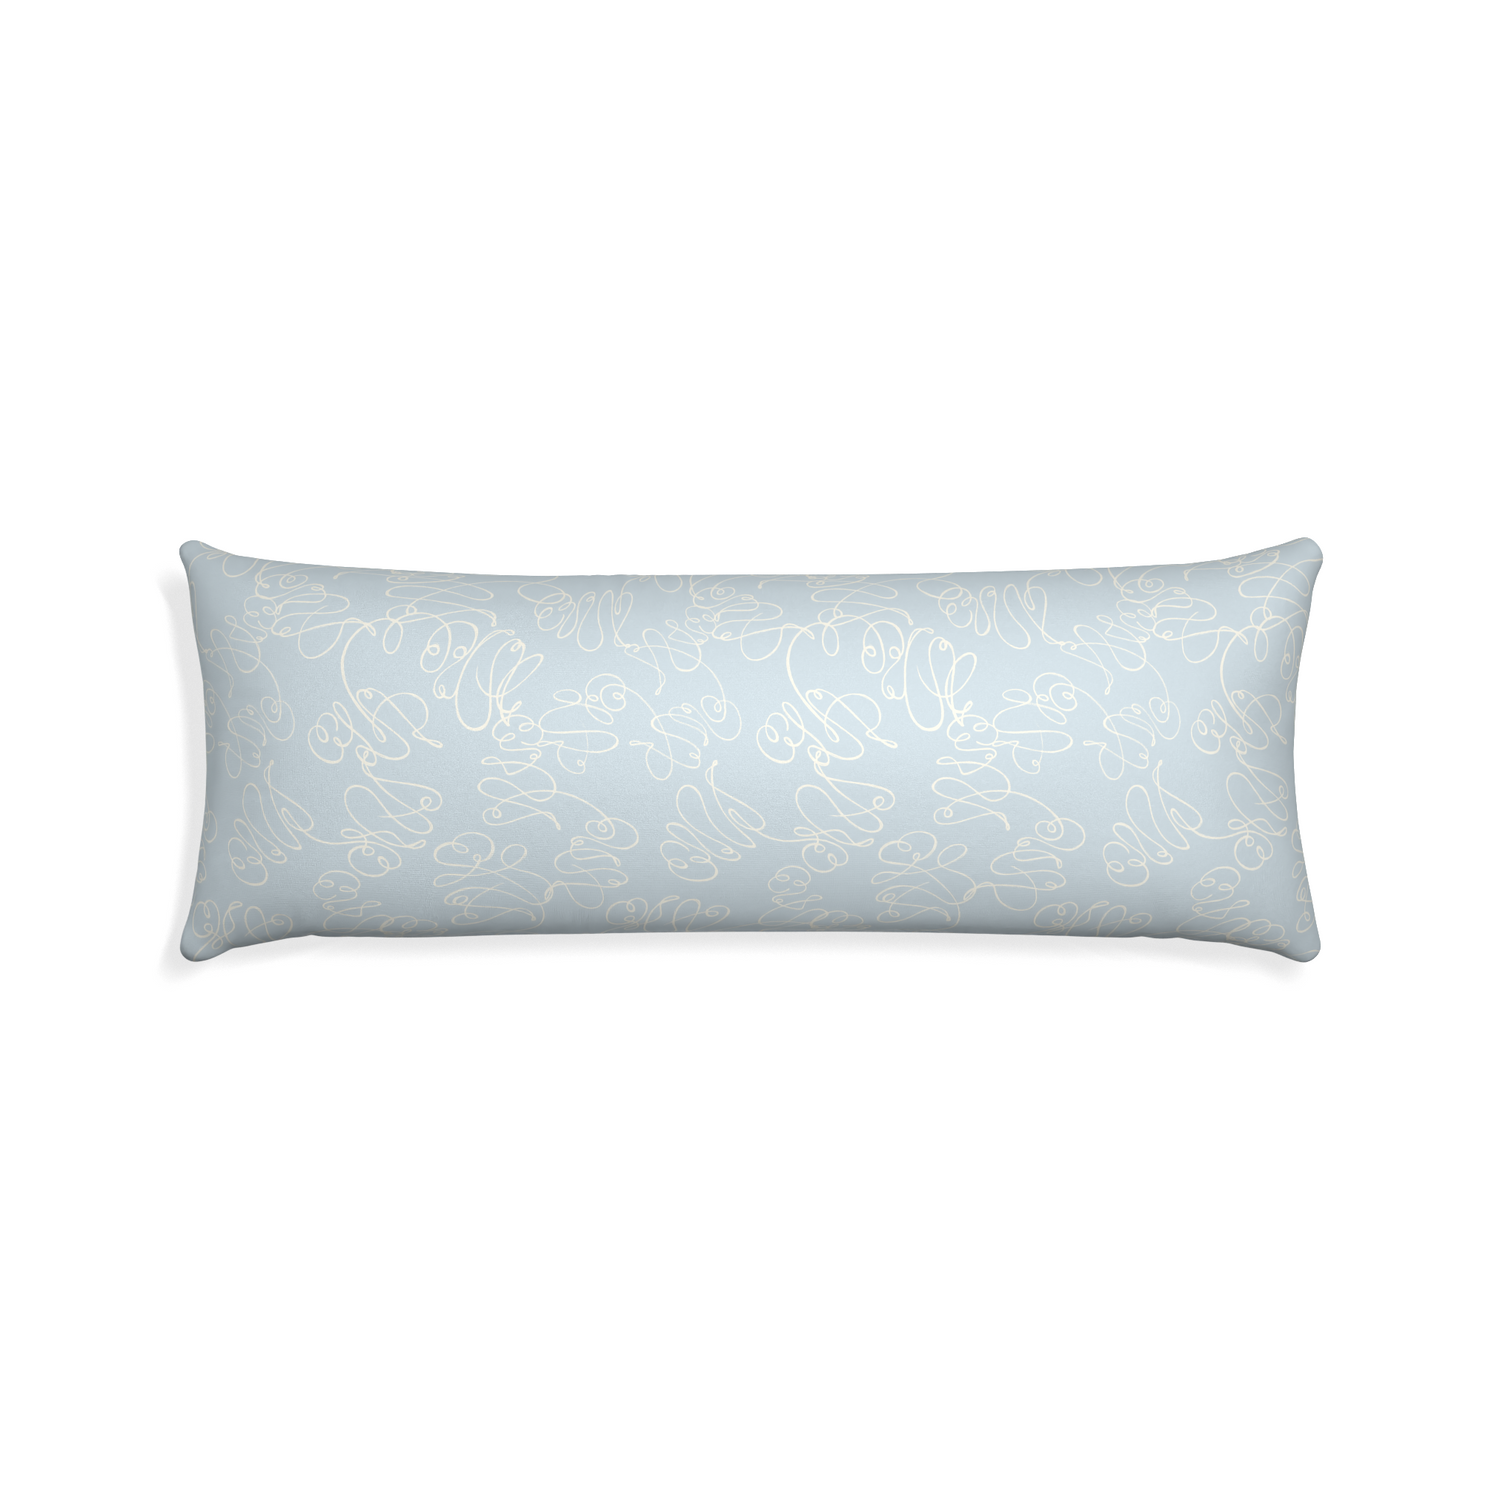 Xl-lumbar mirabella custom powder blue abstractpillow with none on white background